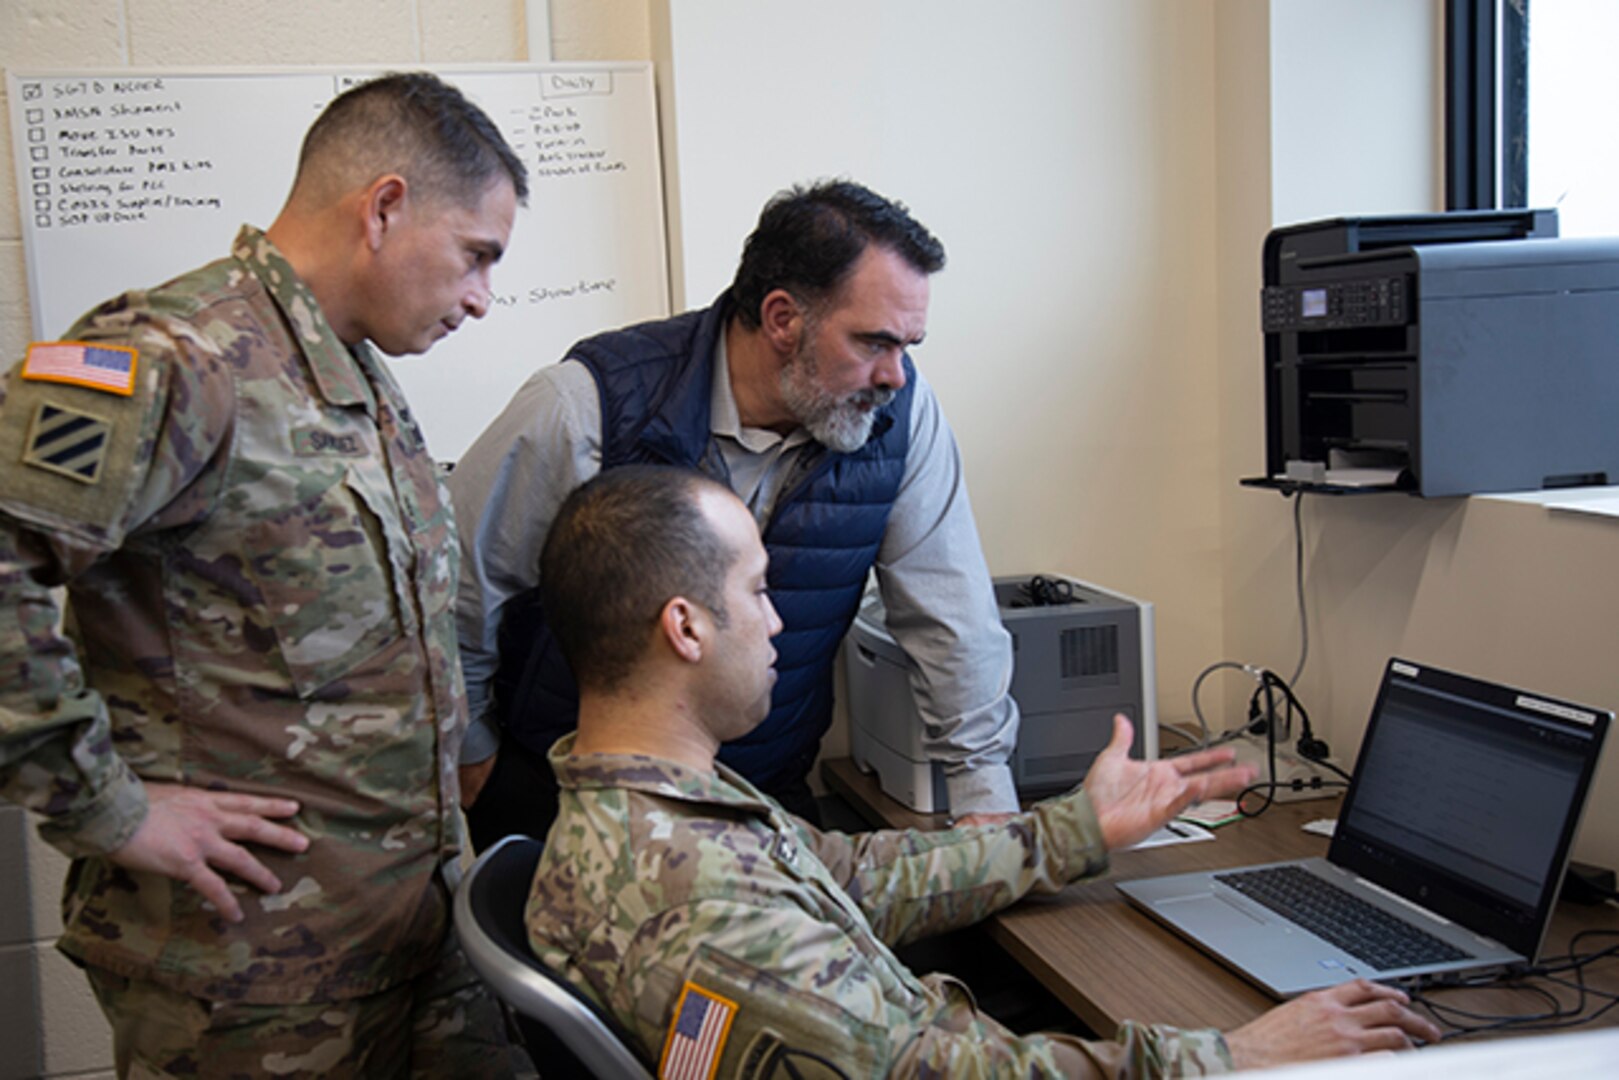 DLA Aviation team members review computer reports with Army service member.